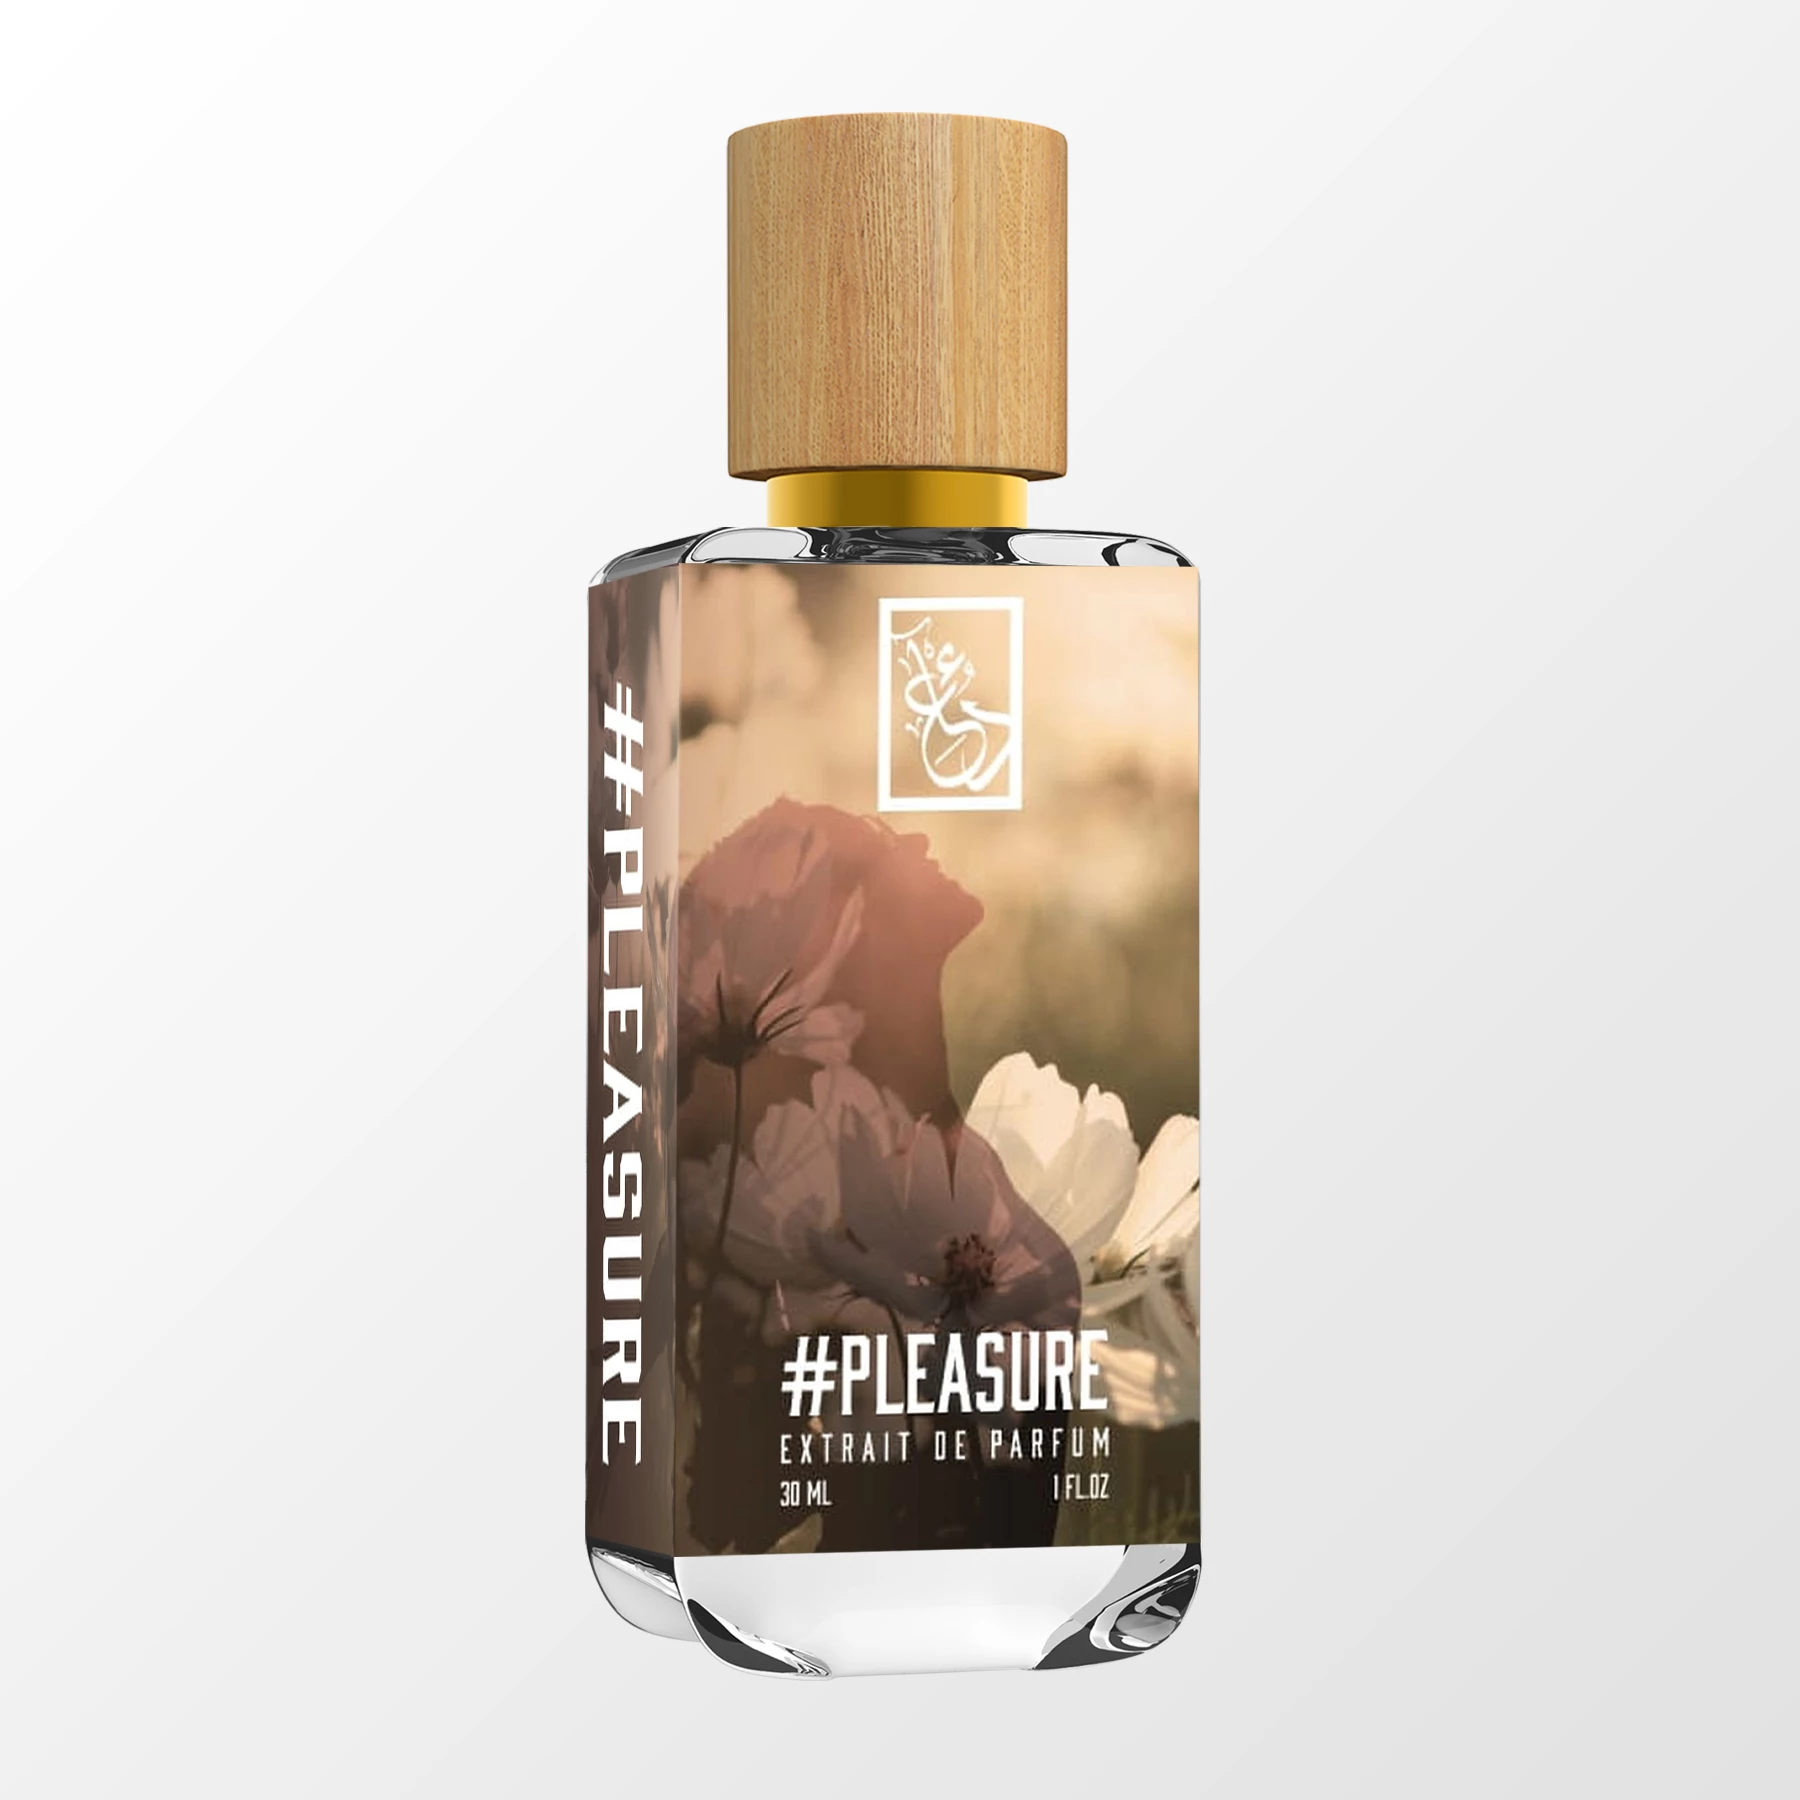 Pleasure - DUA FRAGRANCES - Inspired by 69 Christopher DiCas